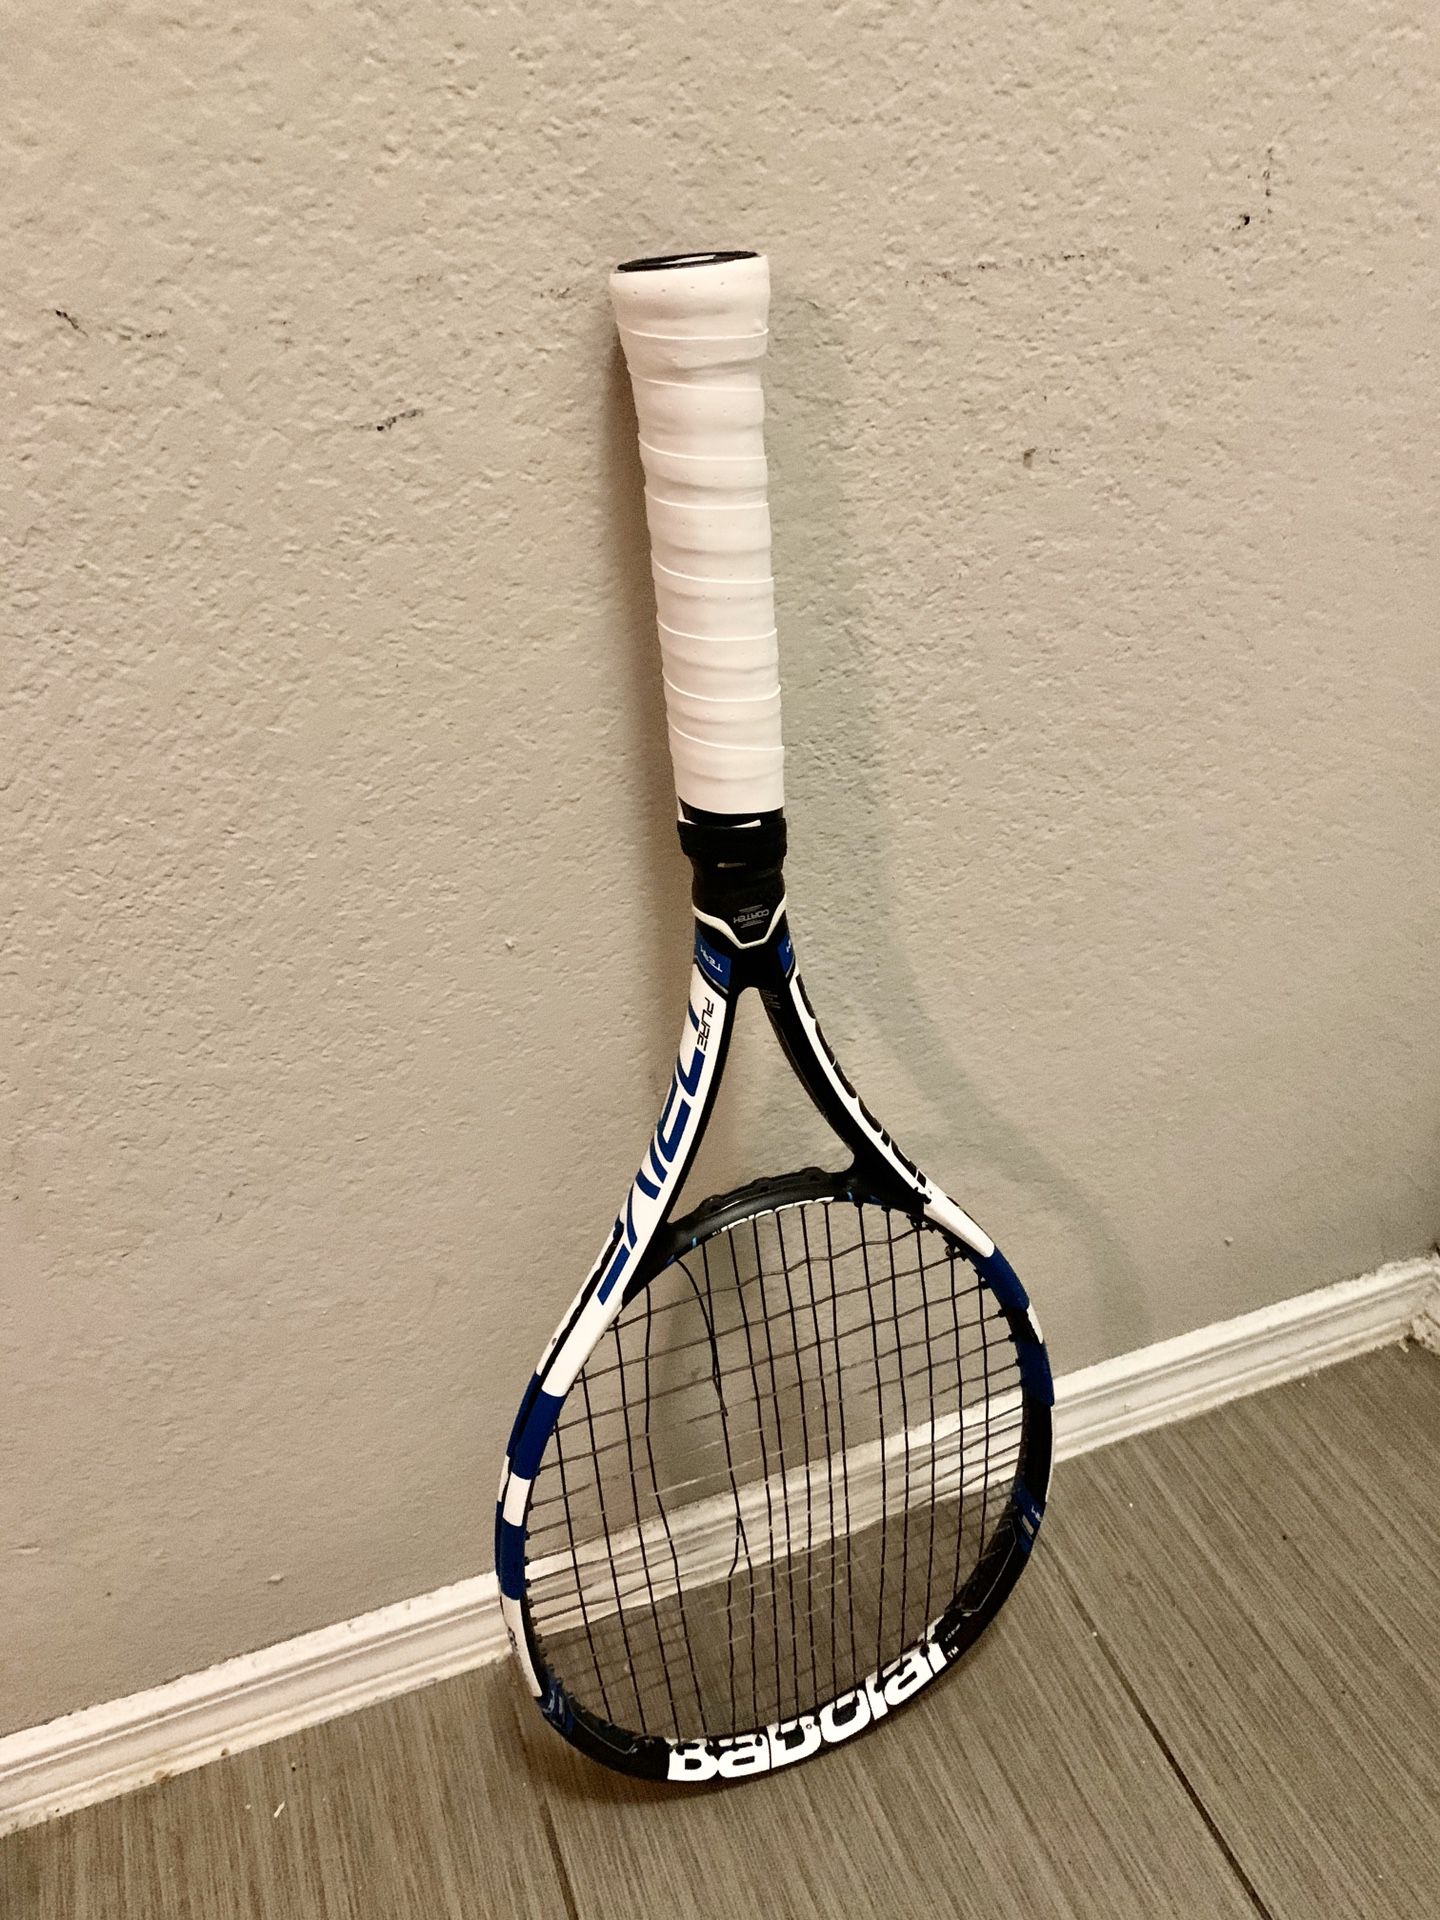 Babolat racket for sale